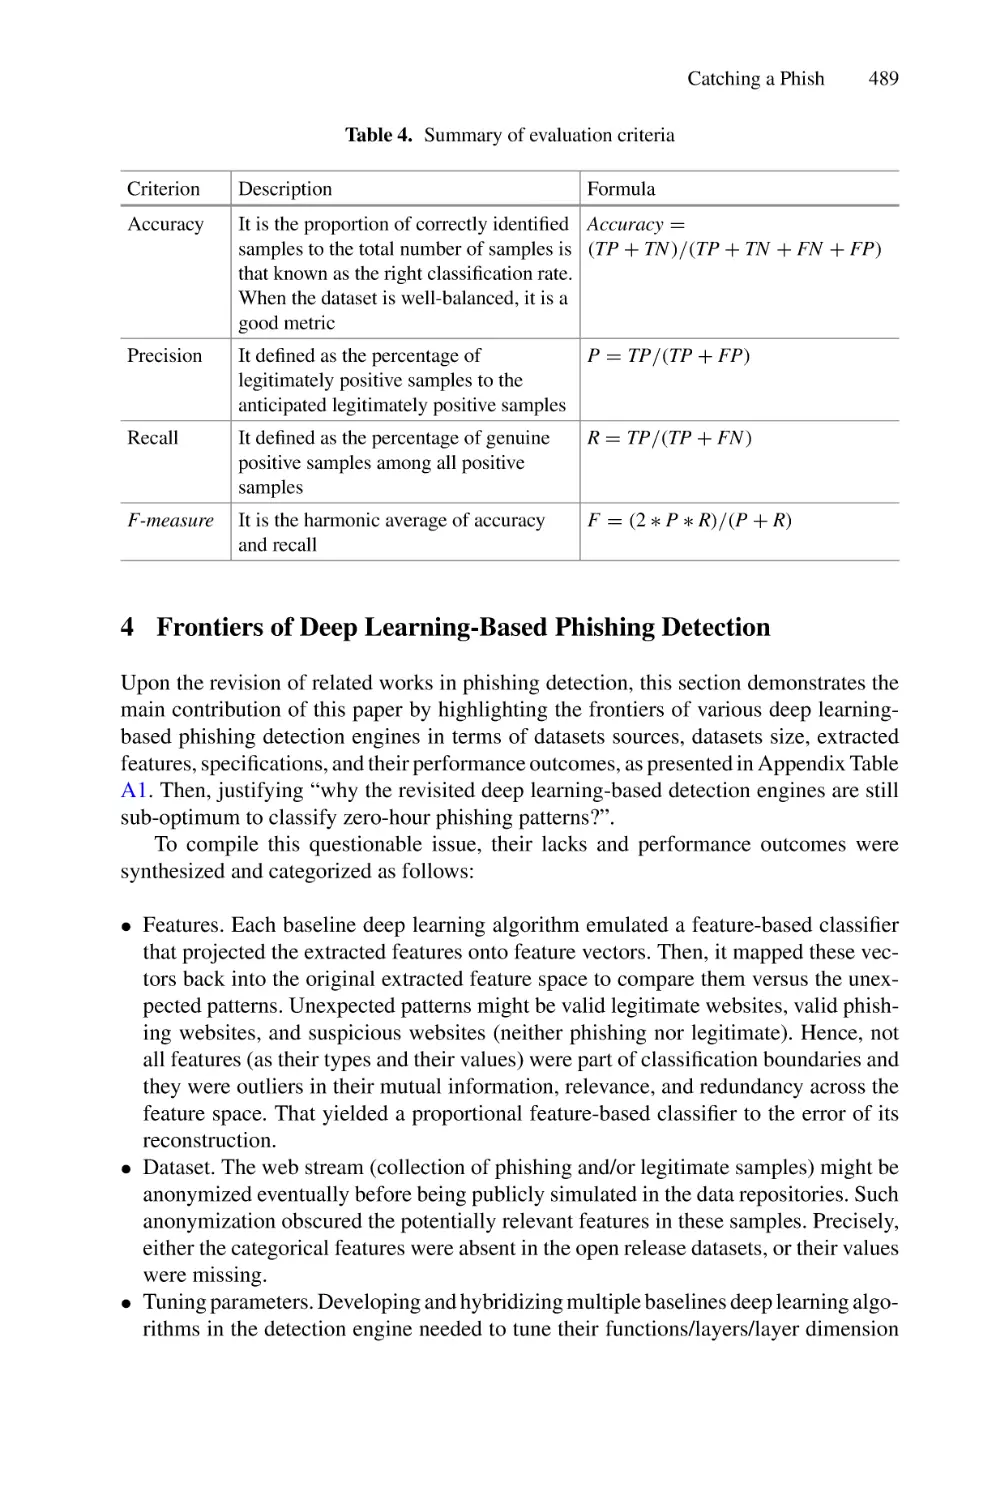 4 Frontiers of Deep Learning-Based Phishing Detection